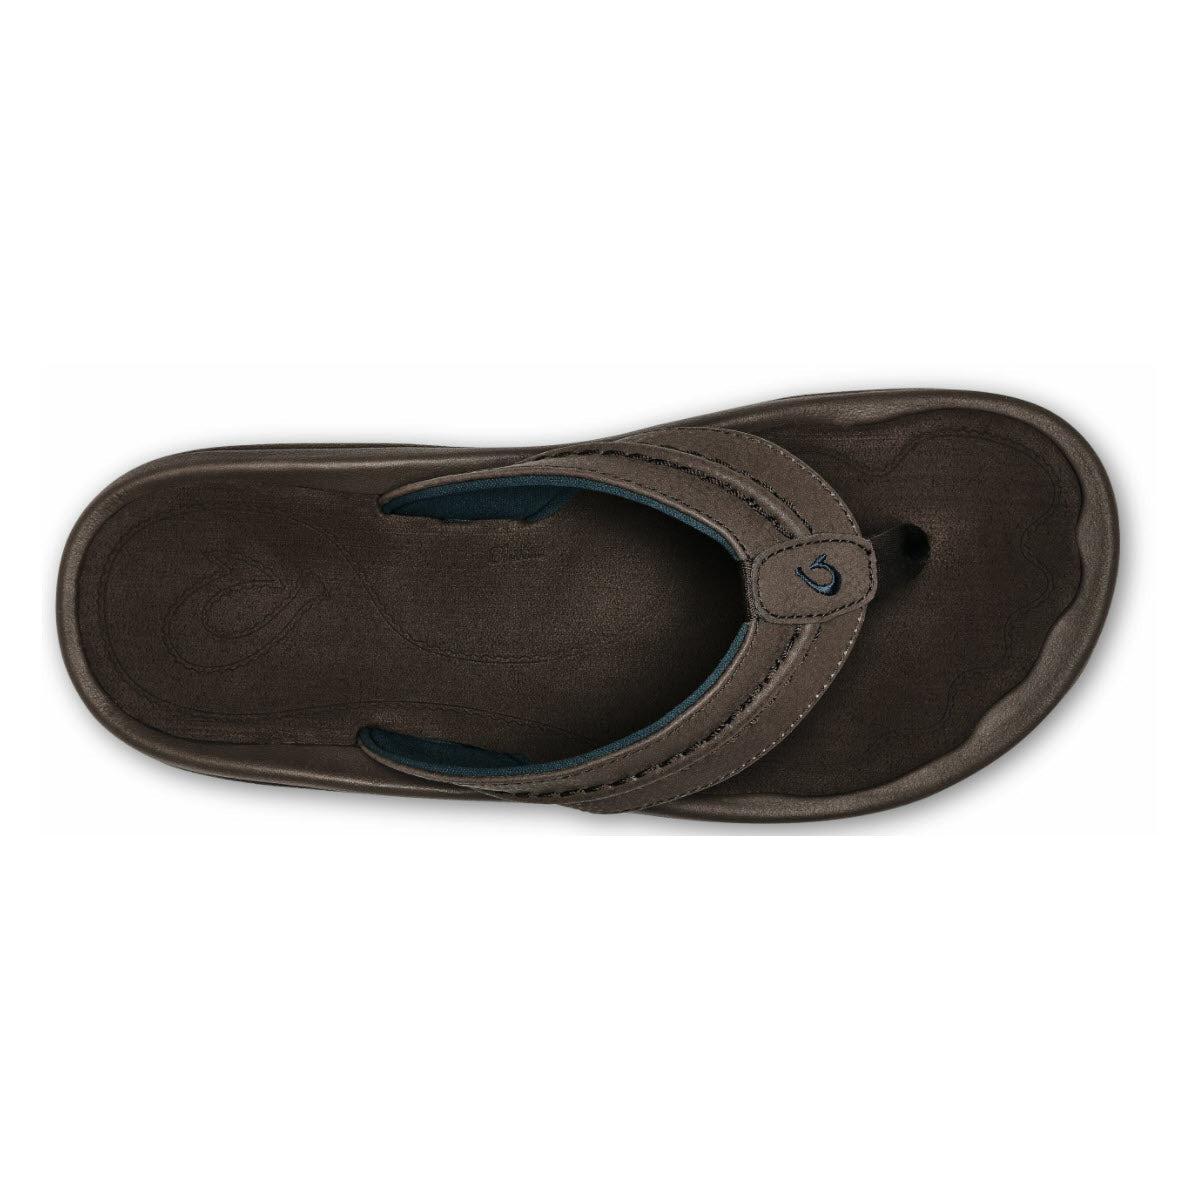 A single brown Olukai Hokua Dark Wood flip-flop with a blue inner lining displayed on a white background.